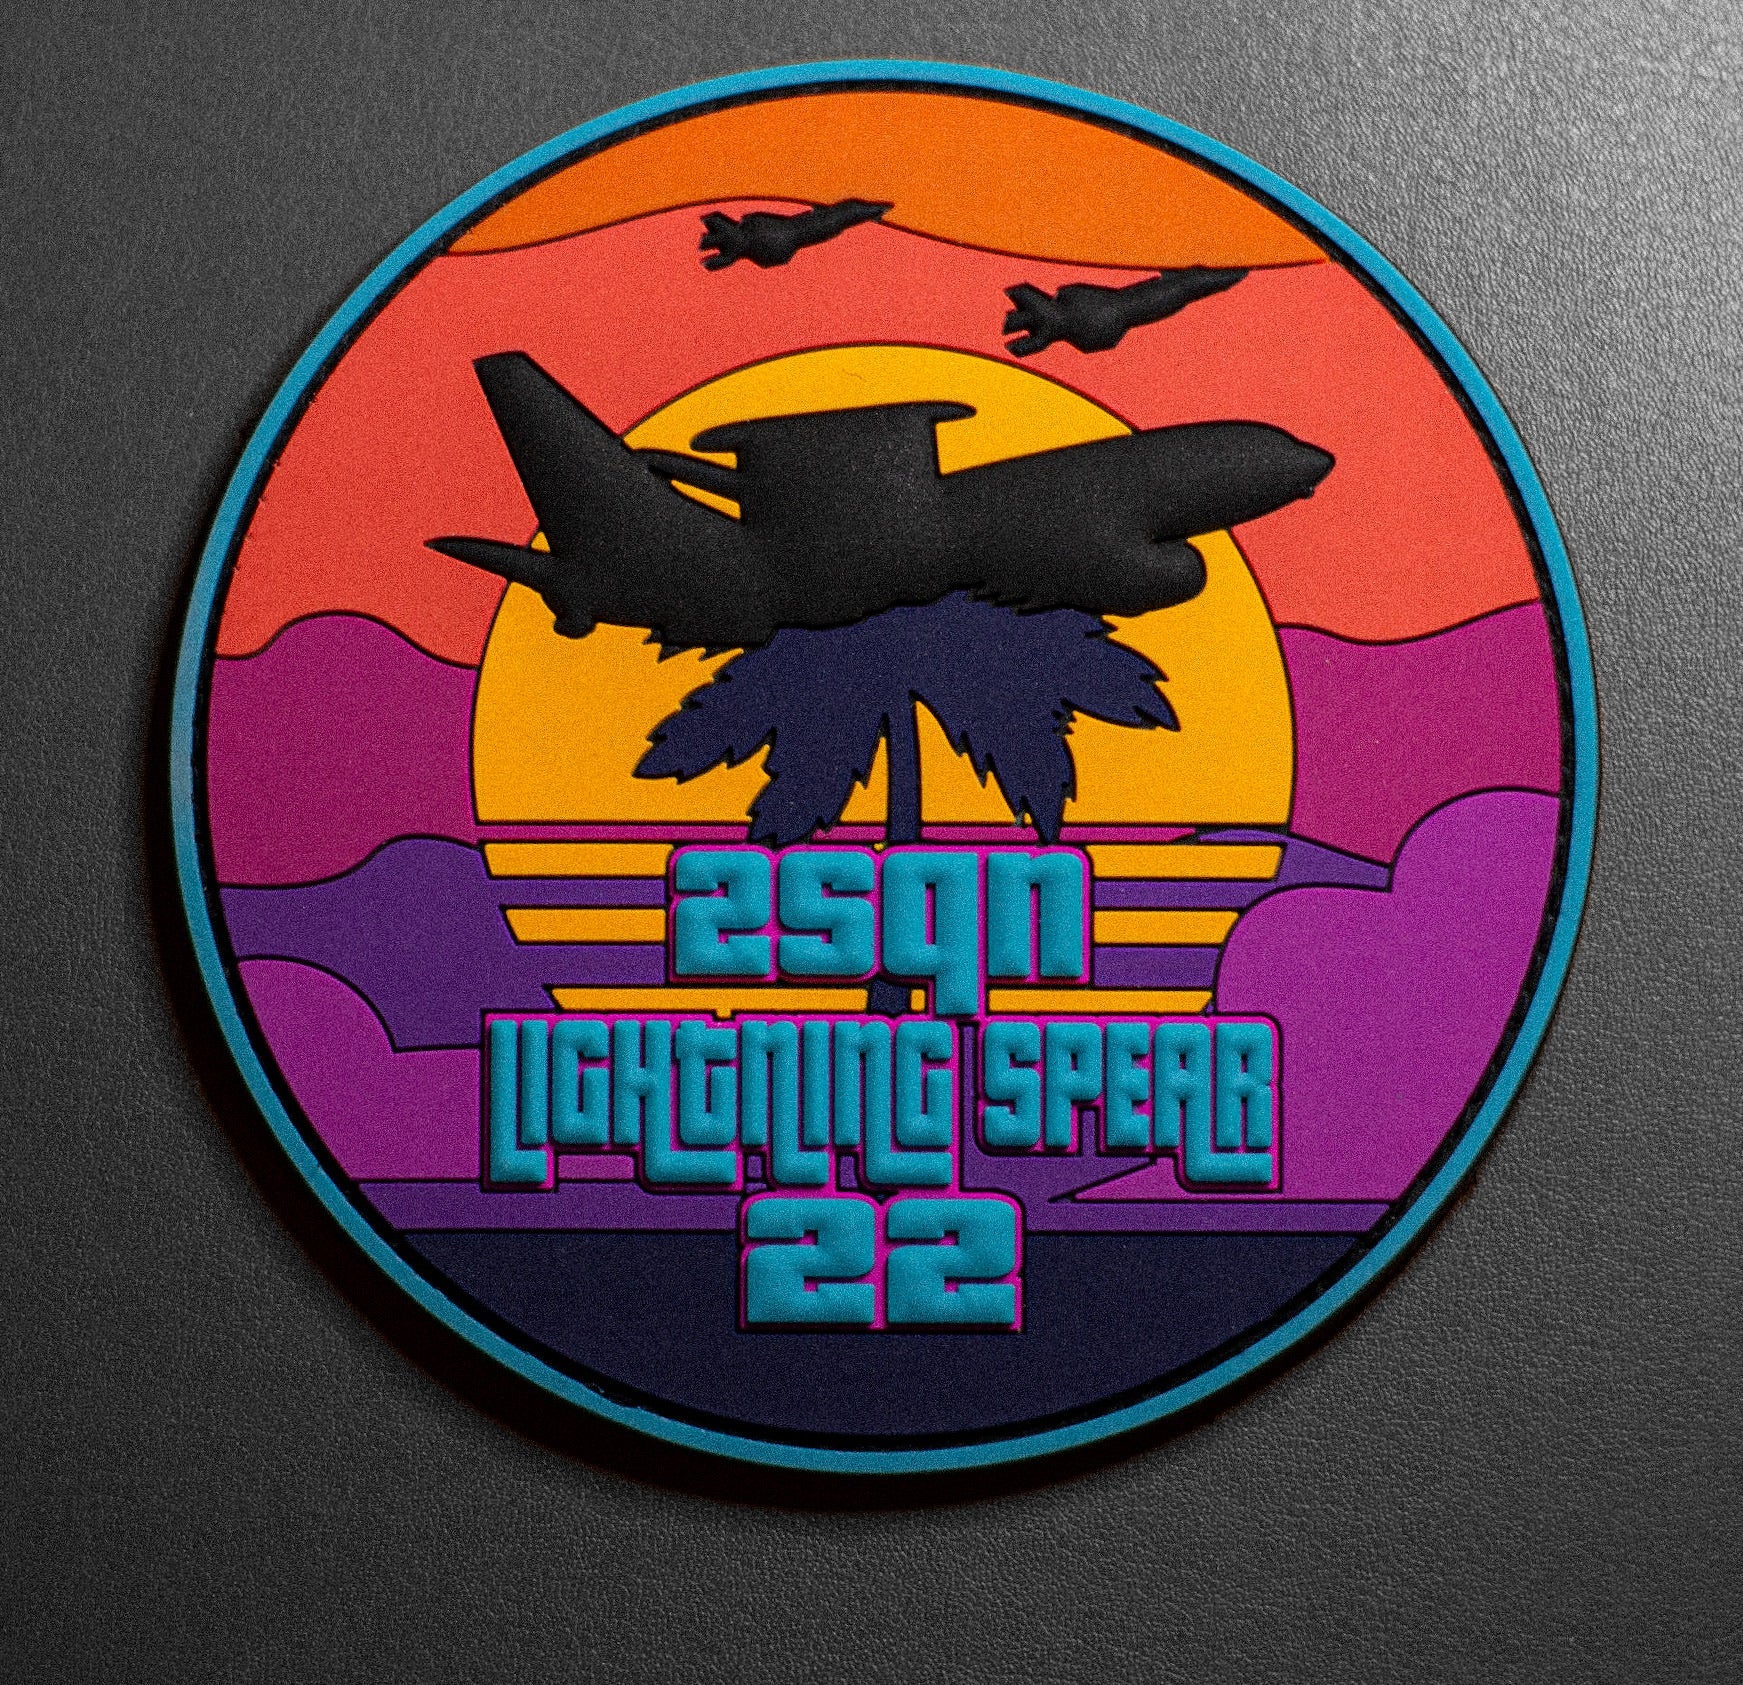 2 Sqn E-7 Lightning Spear Patch